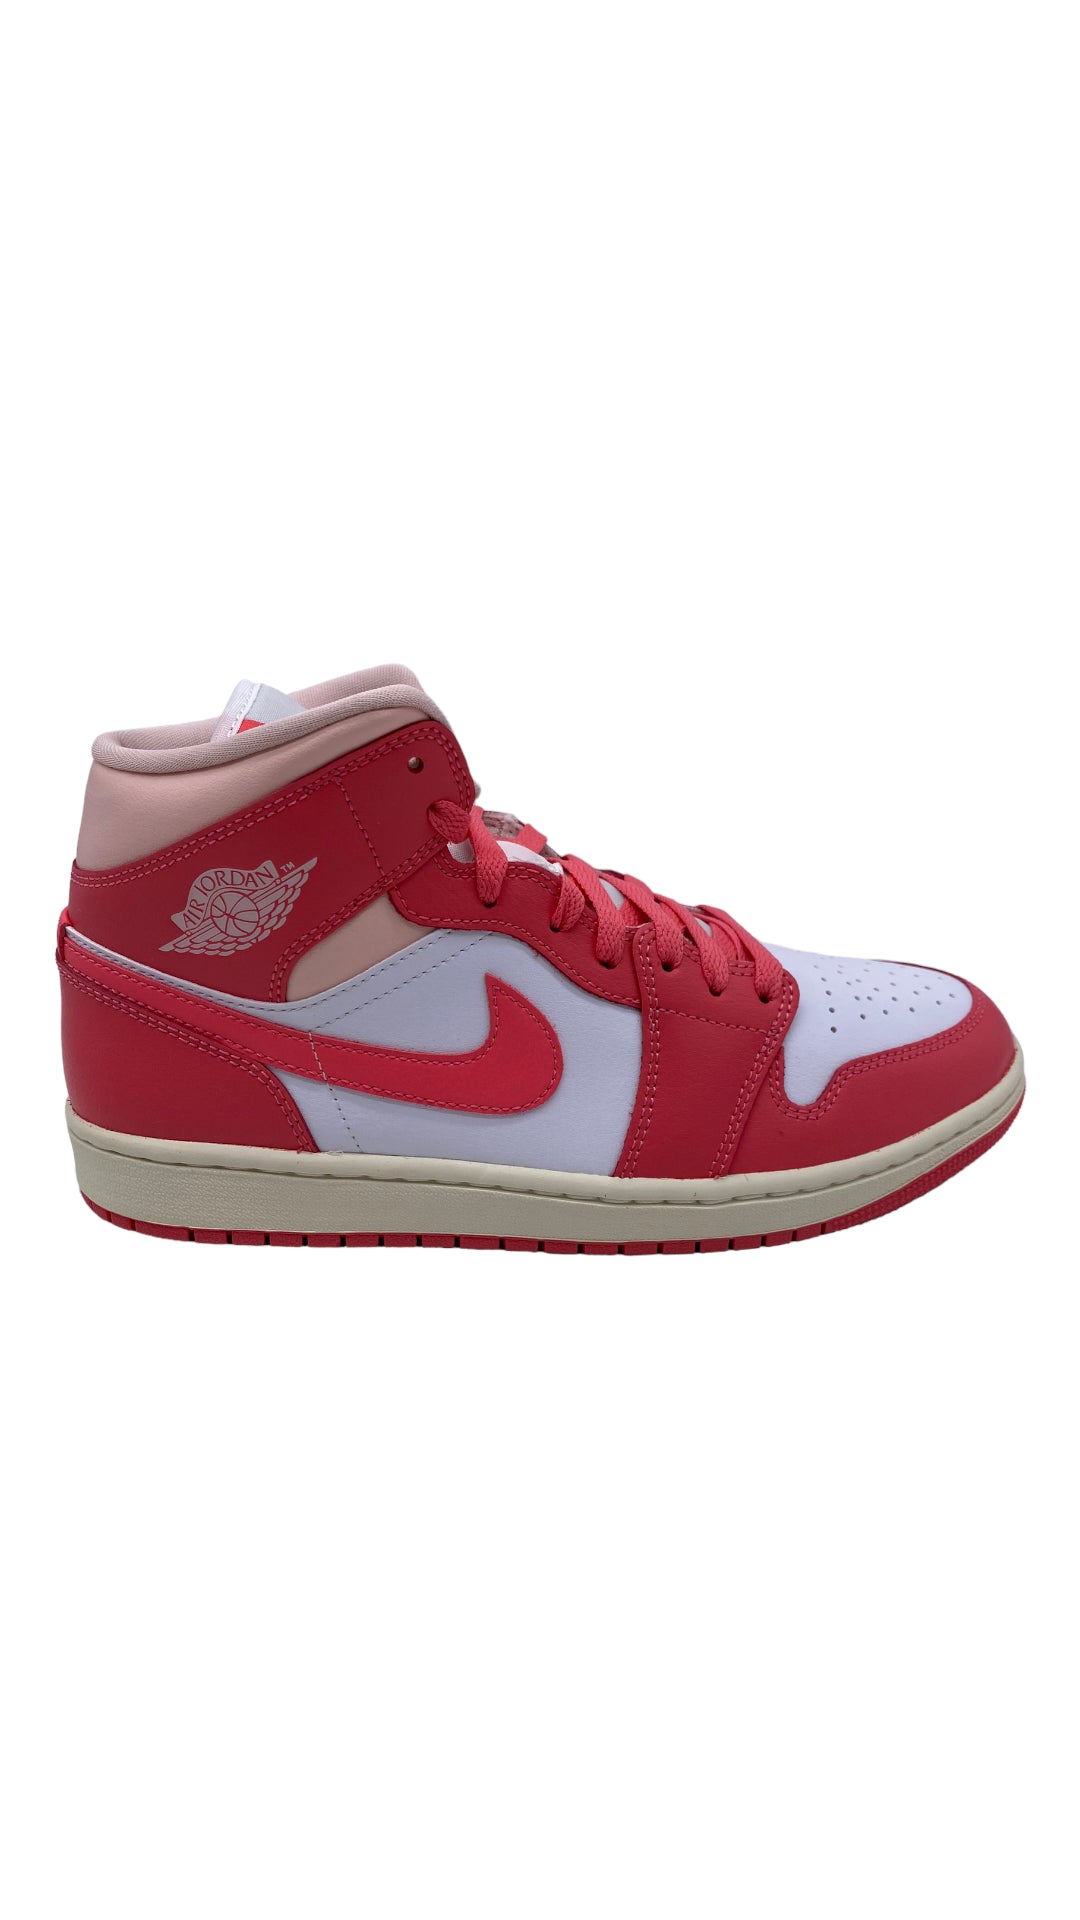 Load image into Gallery viewer, Wmns Air Jordan 1 Mid Strawberries and Cream Sz 9.5 BQ6472-186
